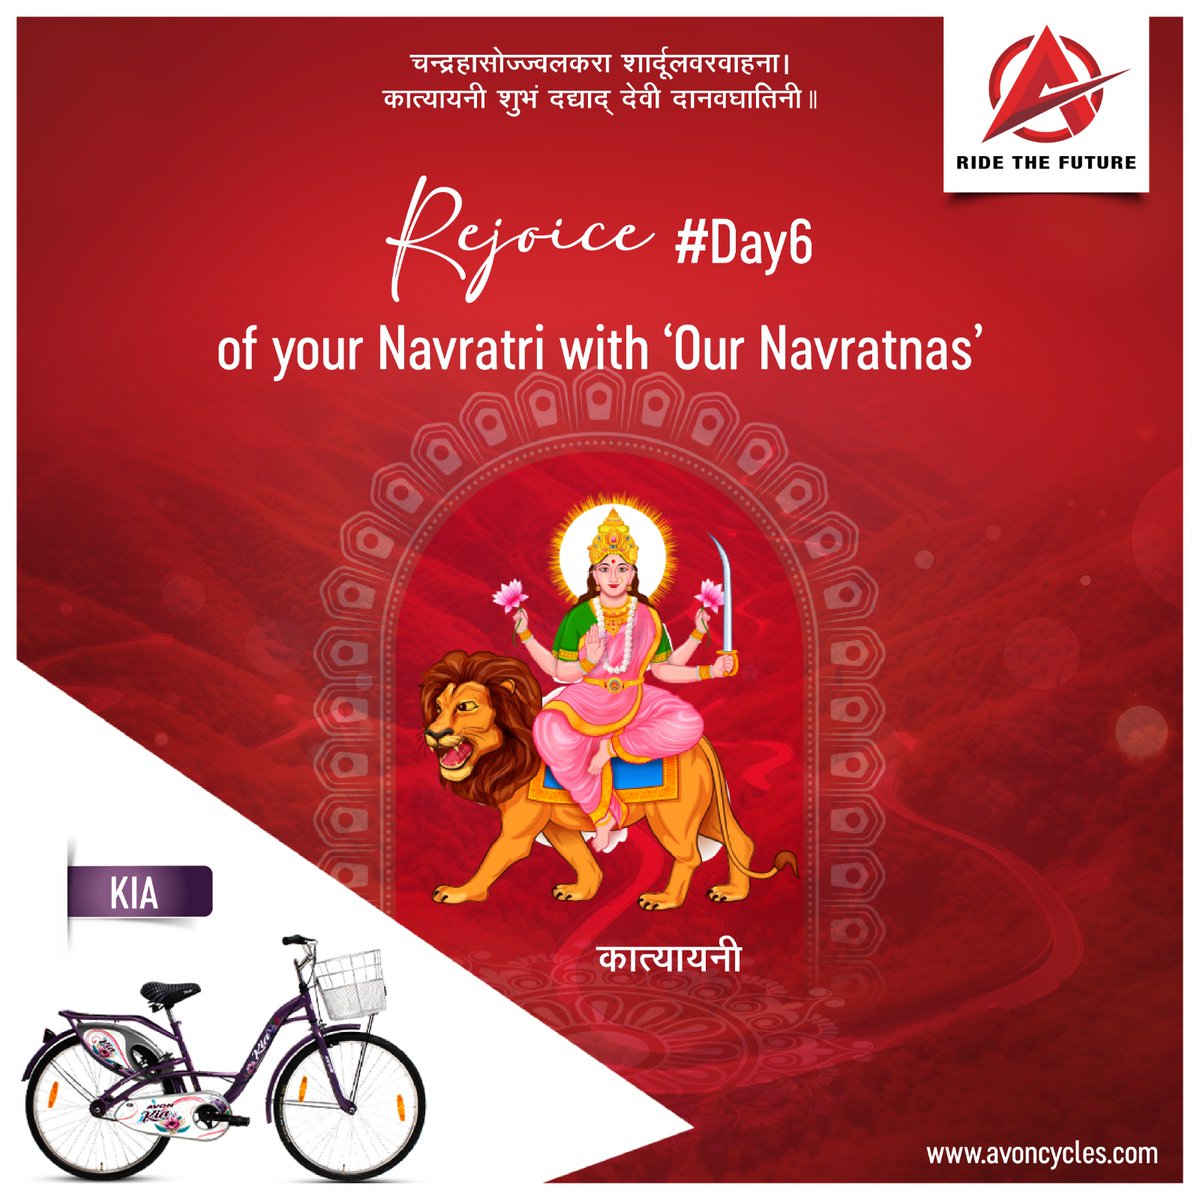 Pedal into the joyous spirit of Navratra Day 6 with Avon Cycles! Let the rhythm of celebration guide your journey as we rejoice in the blessings of this auspicious occasion. 🚲✨ #NavratraVibes #AvonCycles